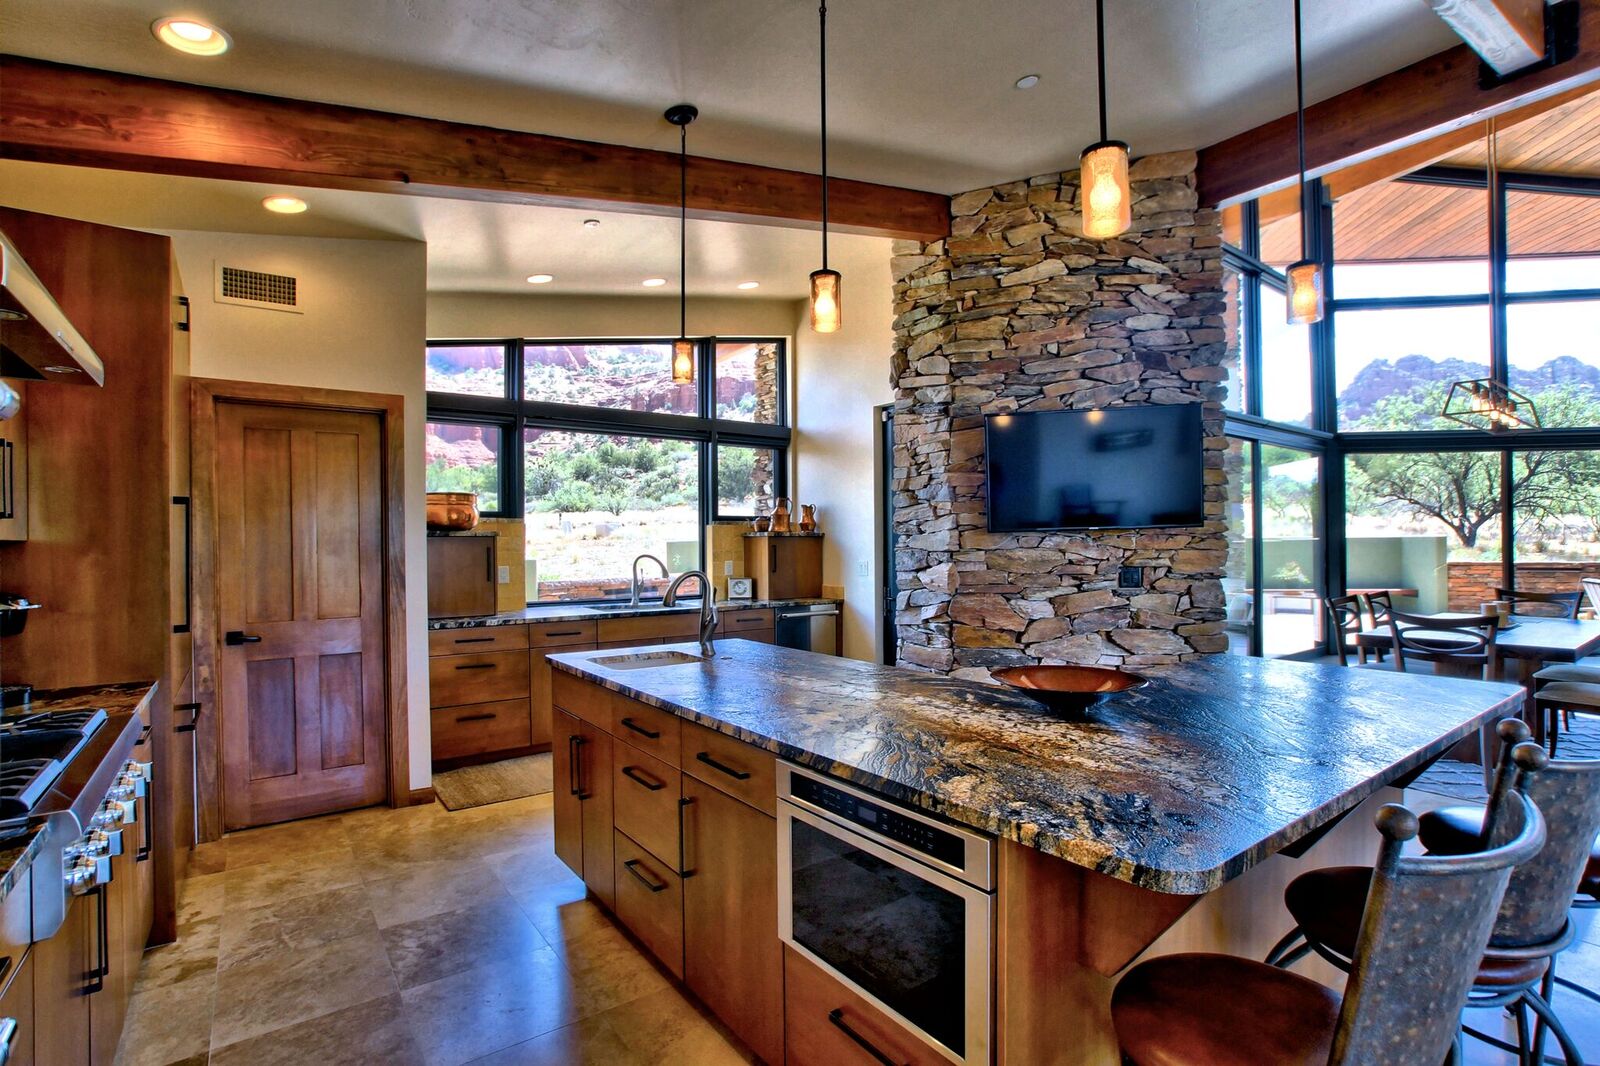 A kitchen with stone walls and a large window.